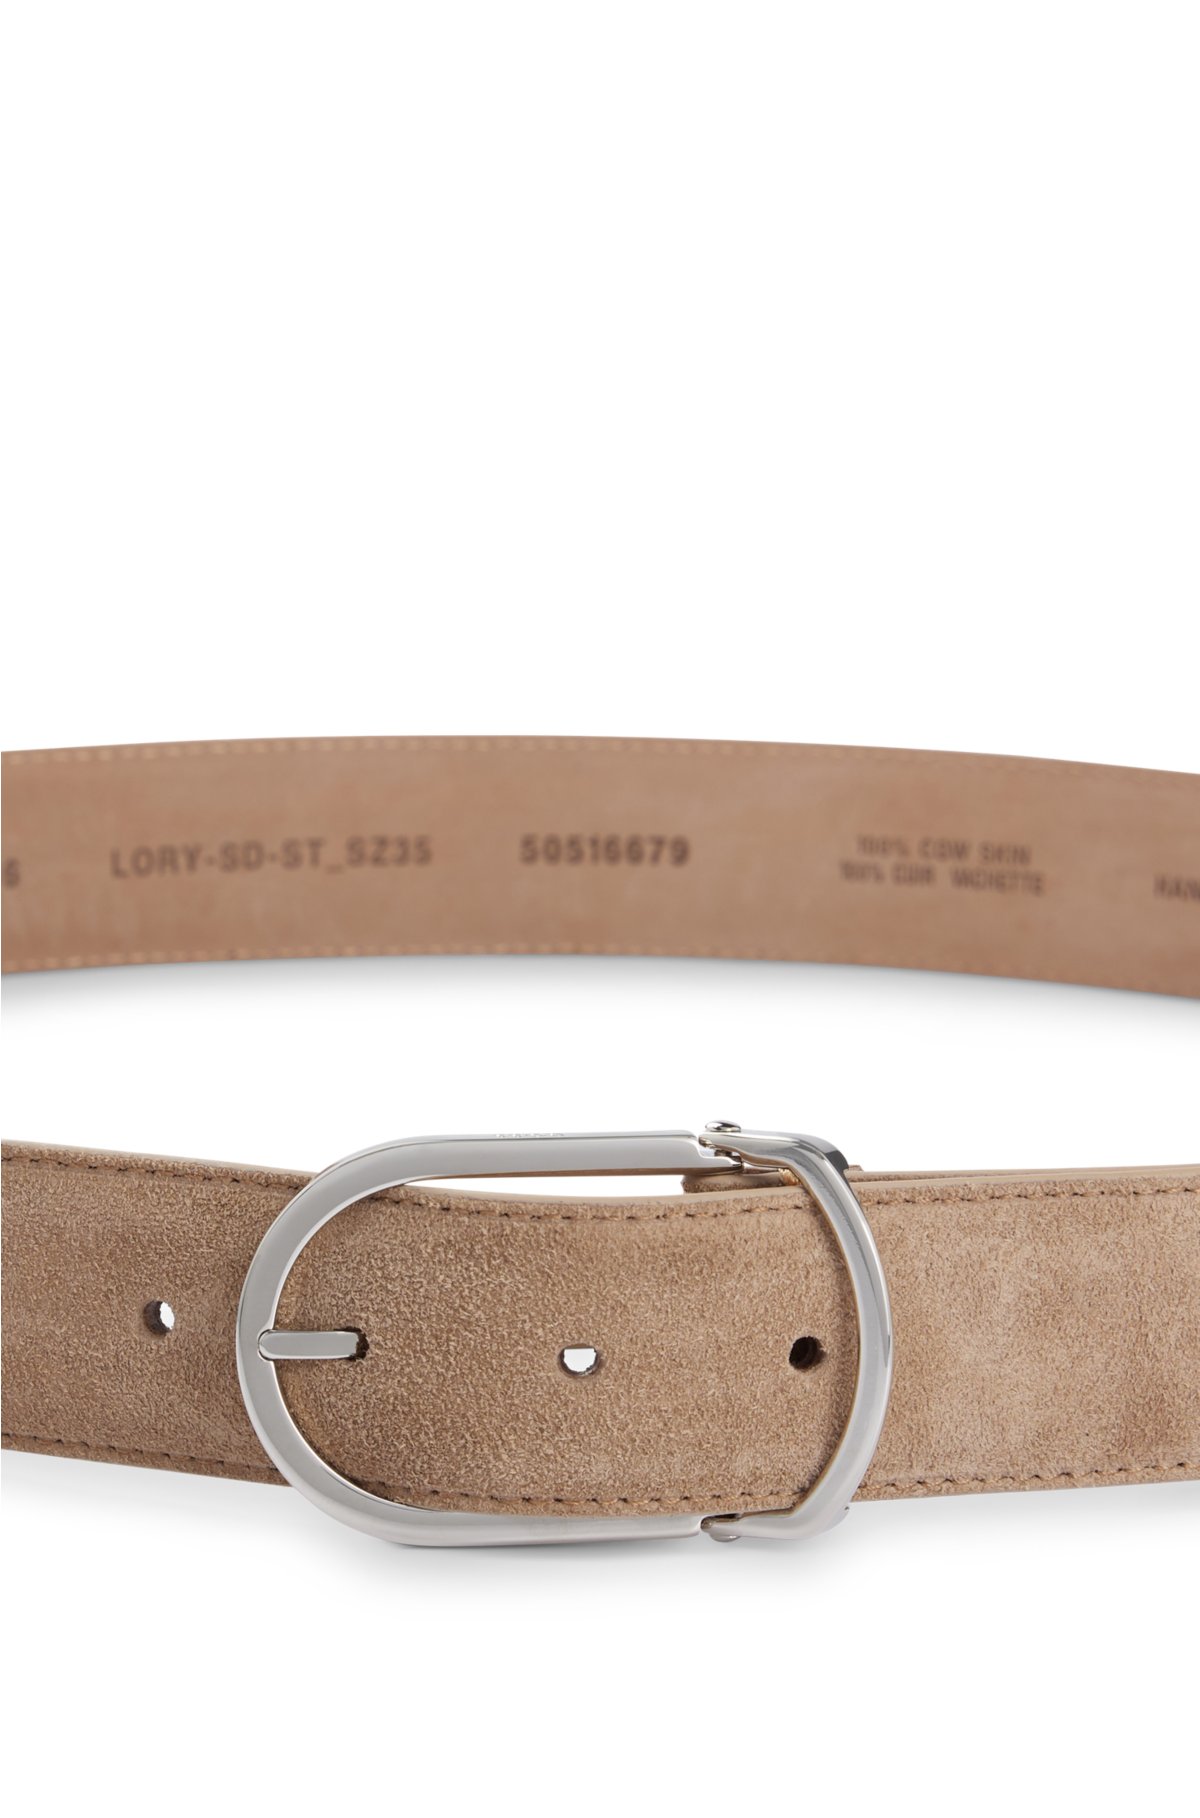 Suede belt with hardware keeper in gift box, Beige